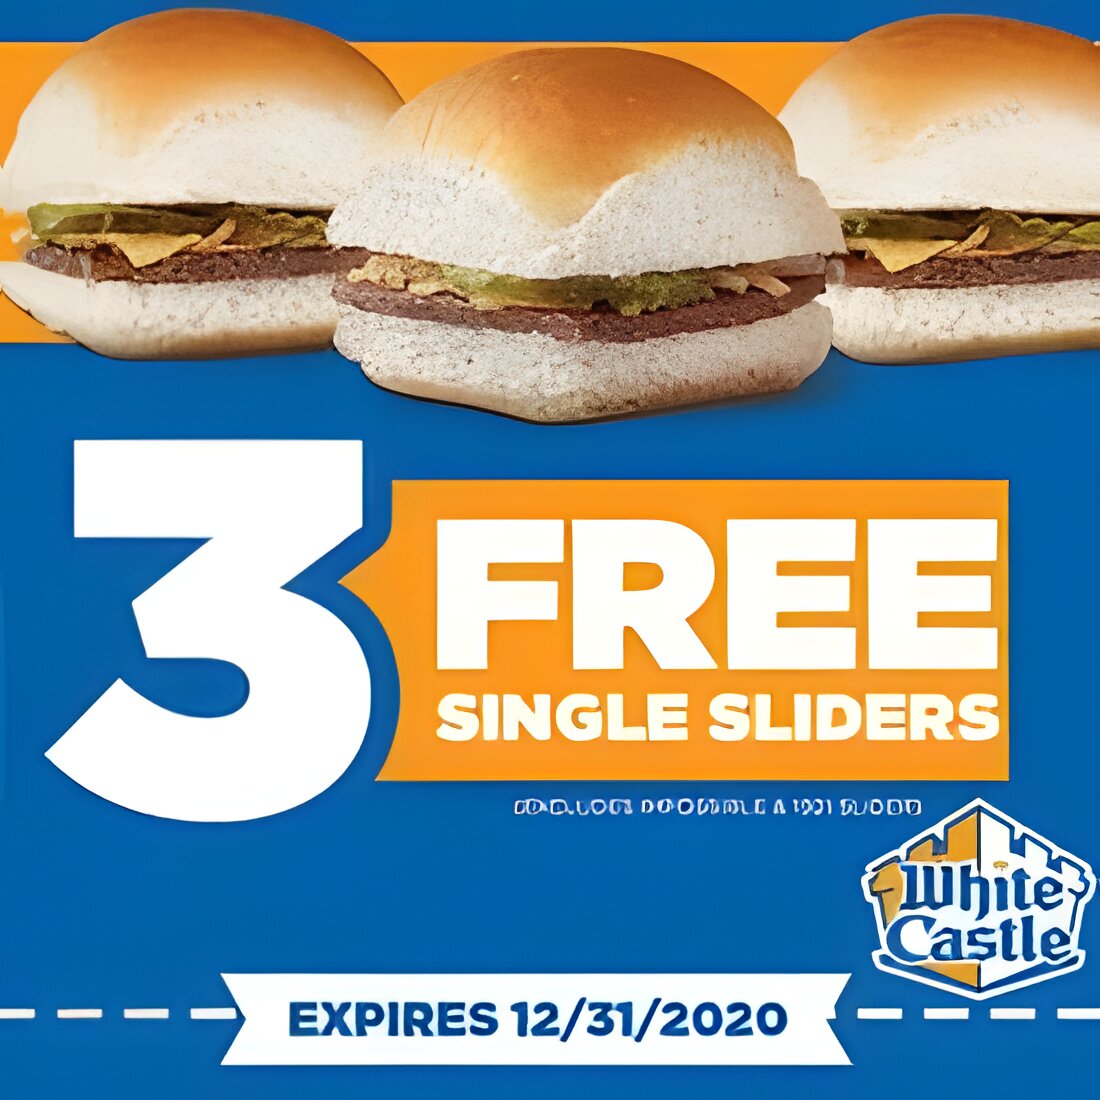 Free Sliders at White Castle